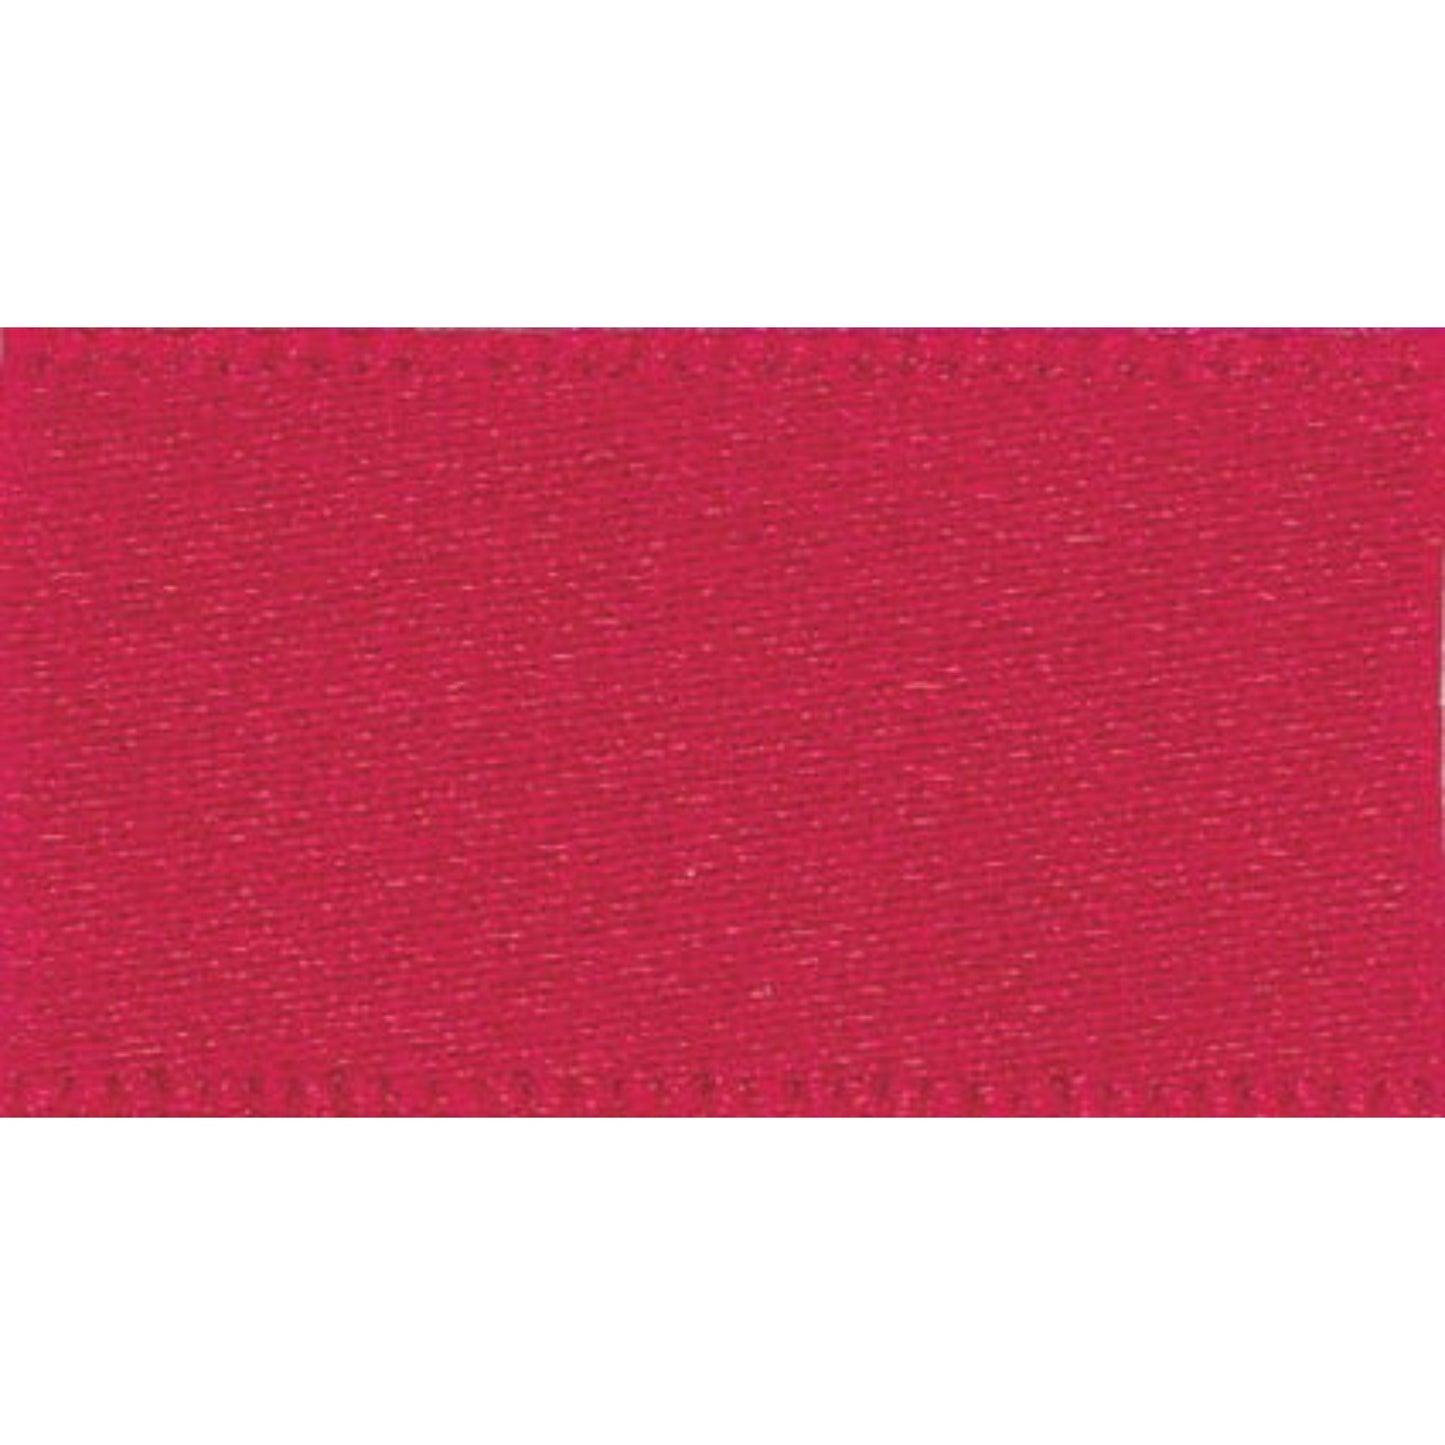 Double Faced Satin Ribbon: Red: 25mm Wide. Price per metre.